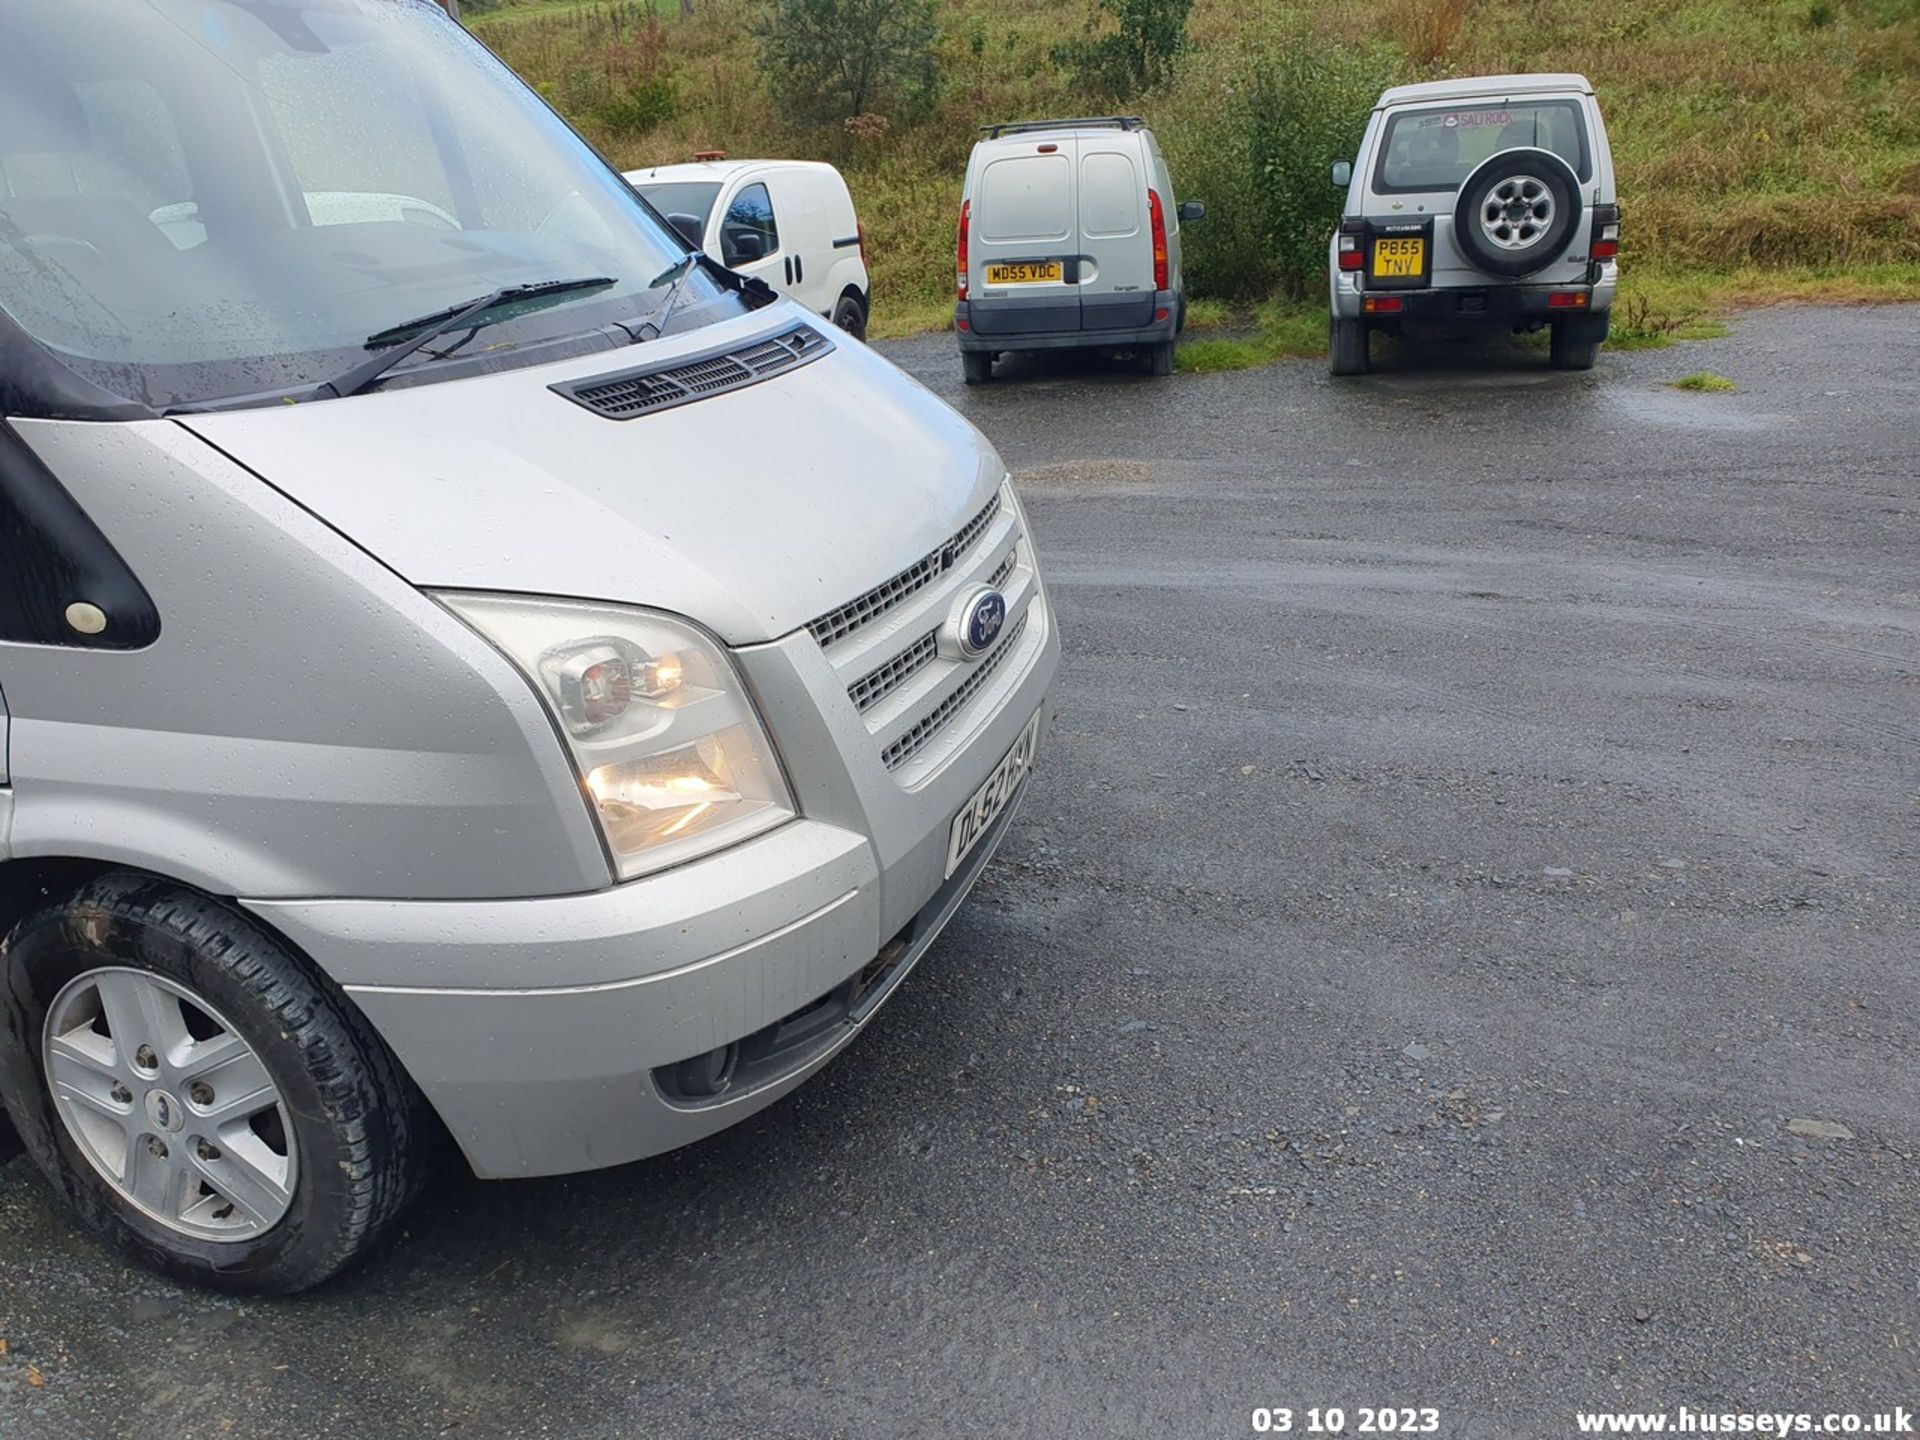 13/62 FORD TRANSIT 125 T280 FWD - 2198cc 5dr MPV (Silver, 146k) - Image 26 of 65